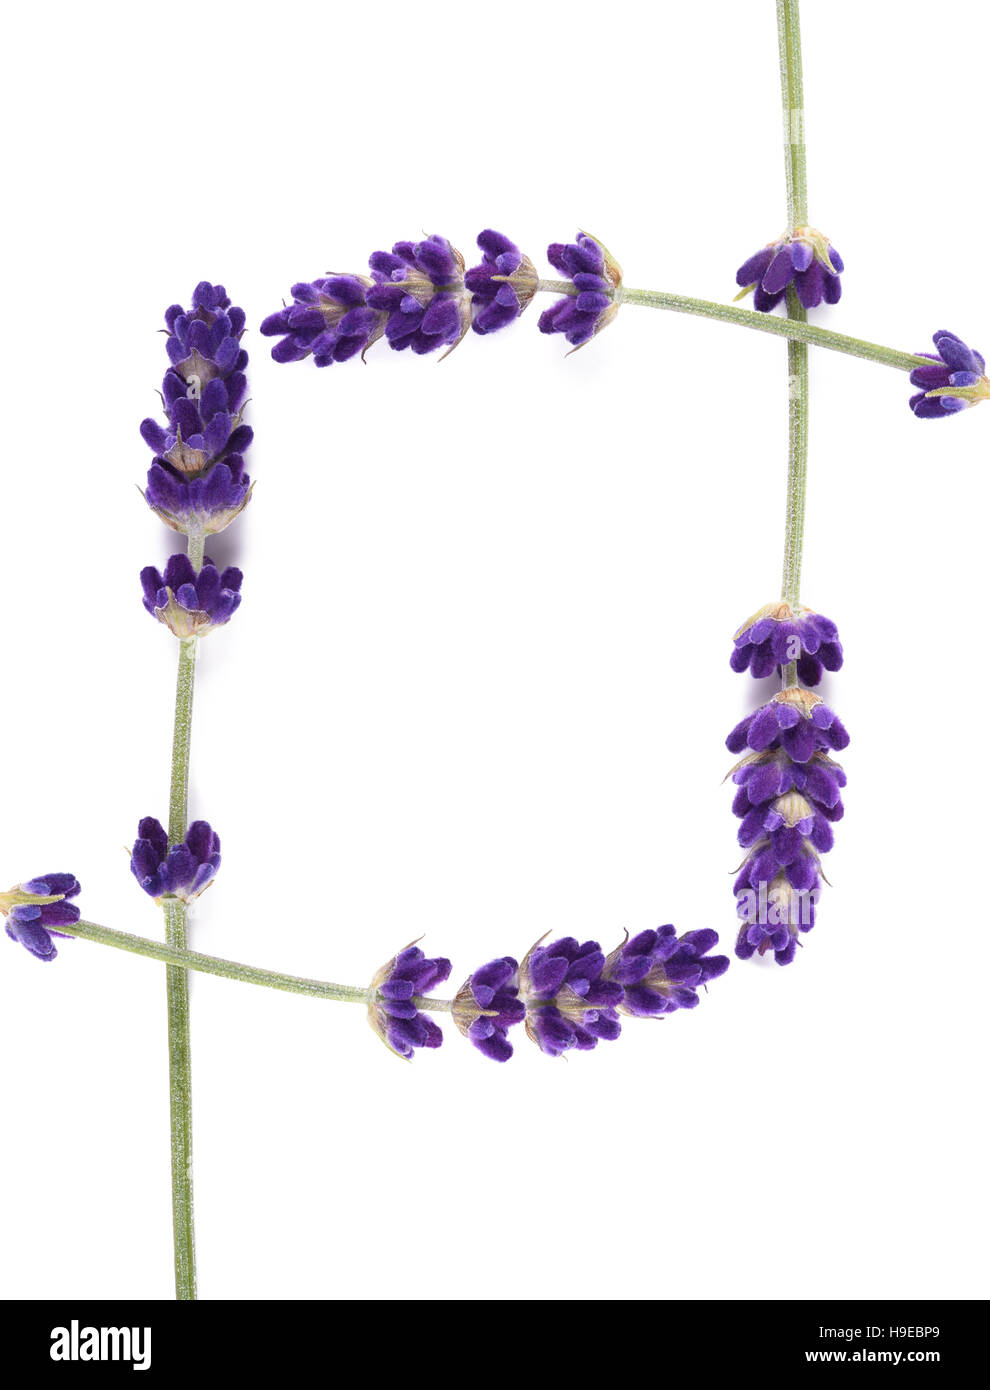 Square frame of Lavender flowers with Clipping path Stock Photo